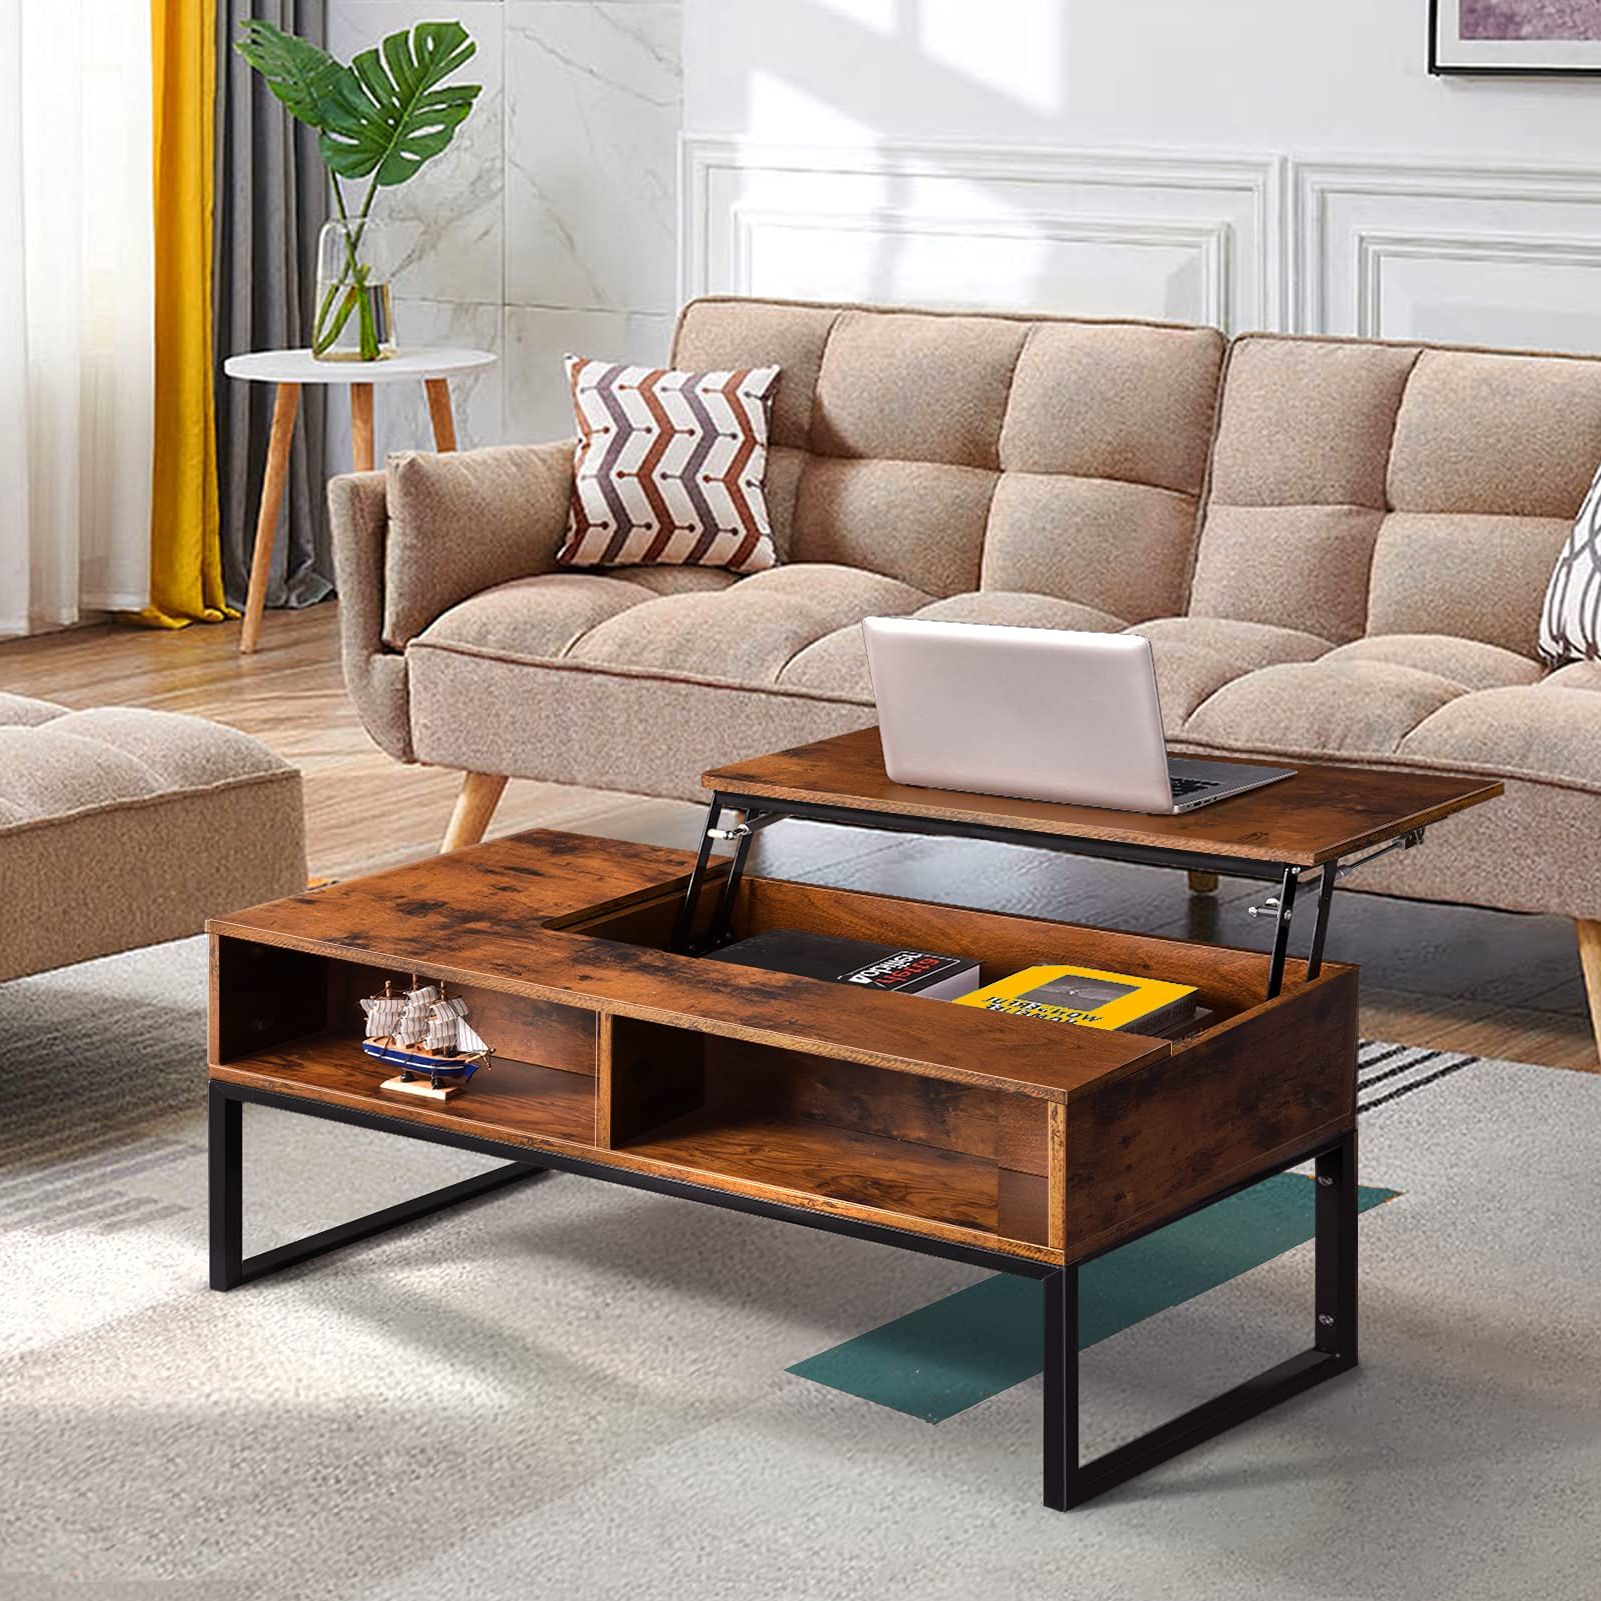 Modern Coffee Tables With Hidden Storage Compartments Intended For Current Houssem Modern Adjustable Lift Top Coffee Table With Hidden Compartment (View 4 of 15)